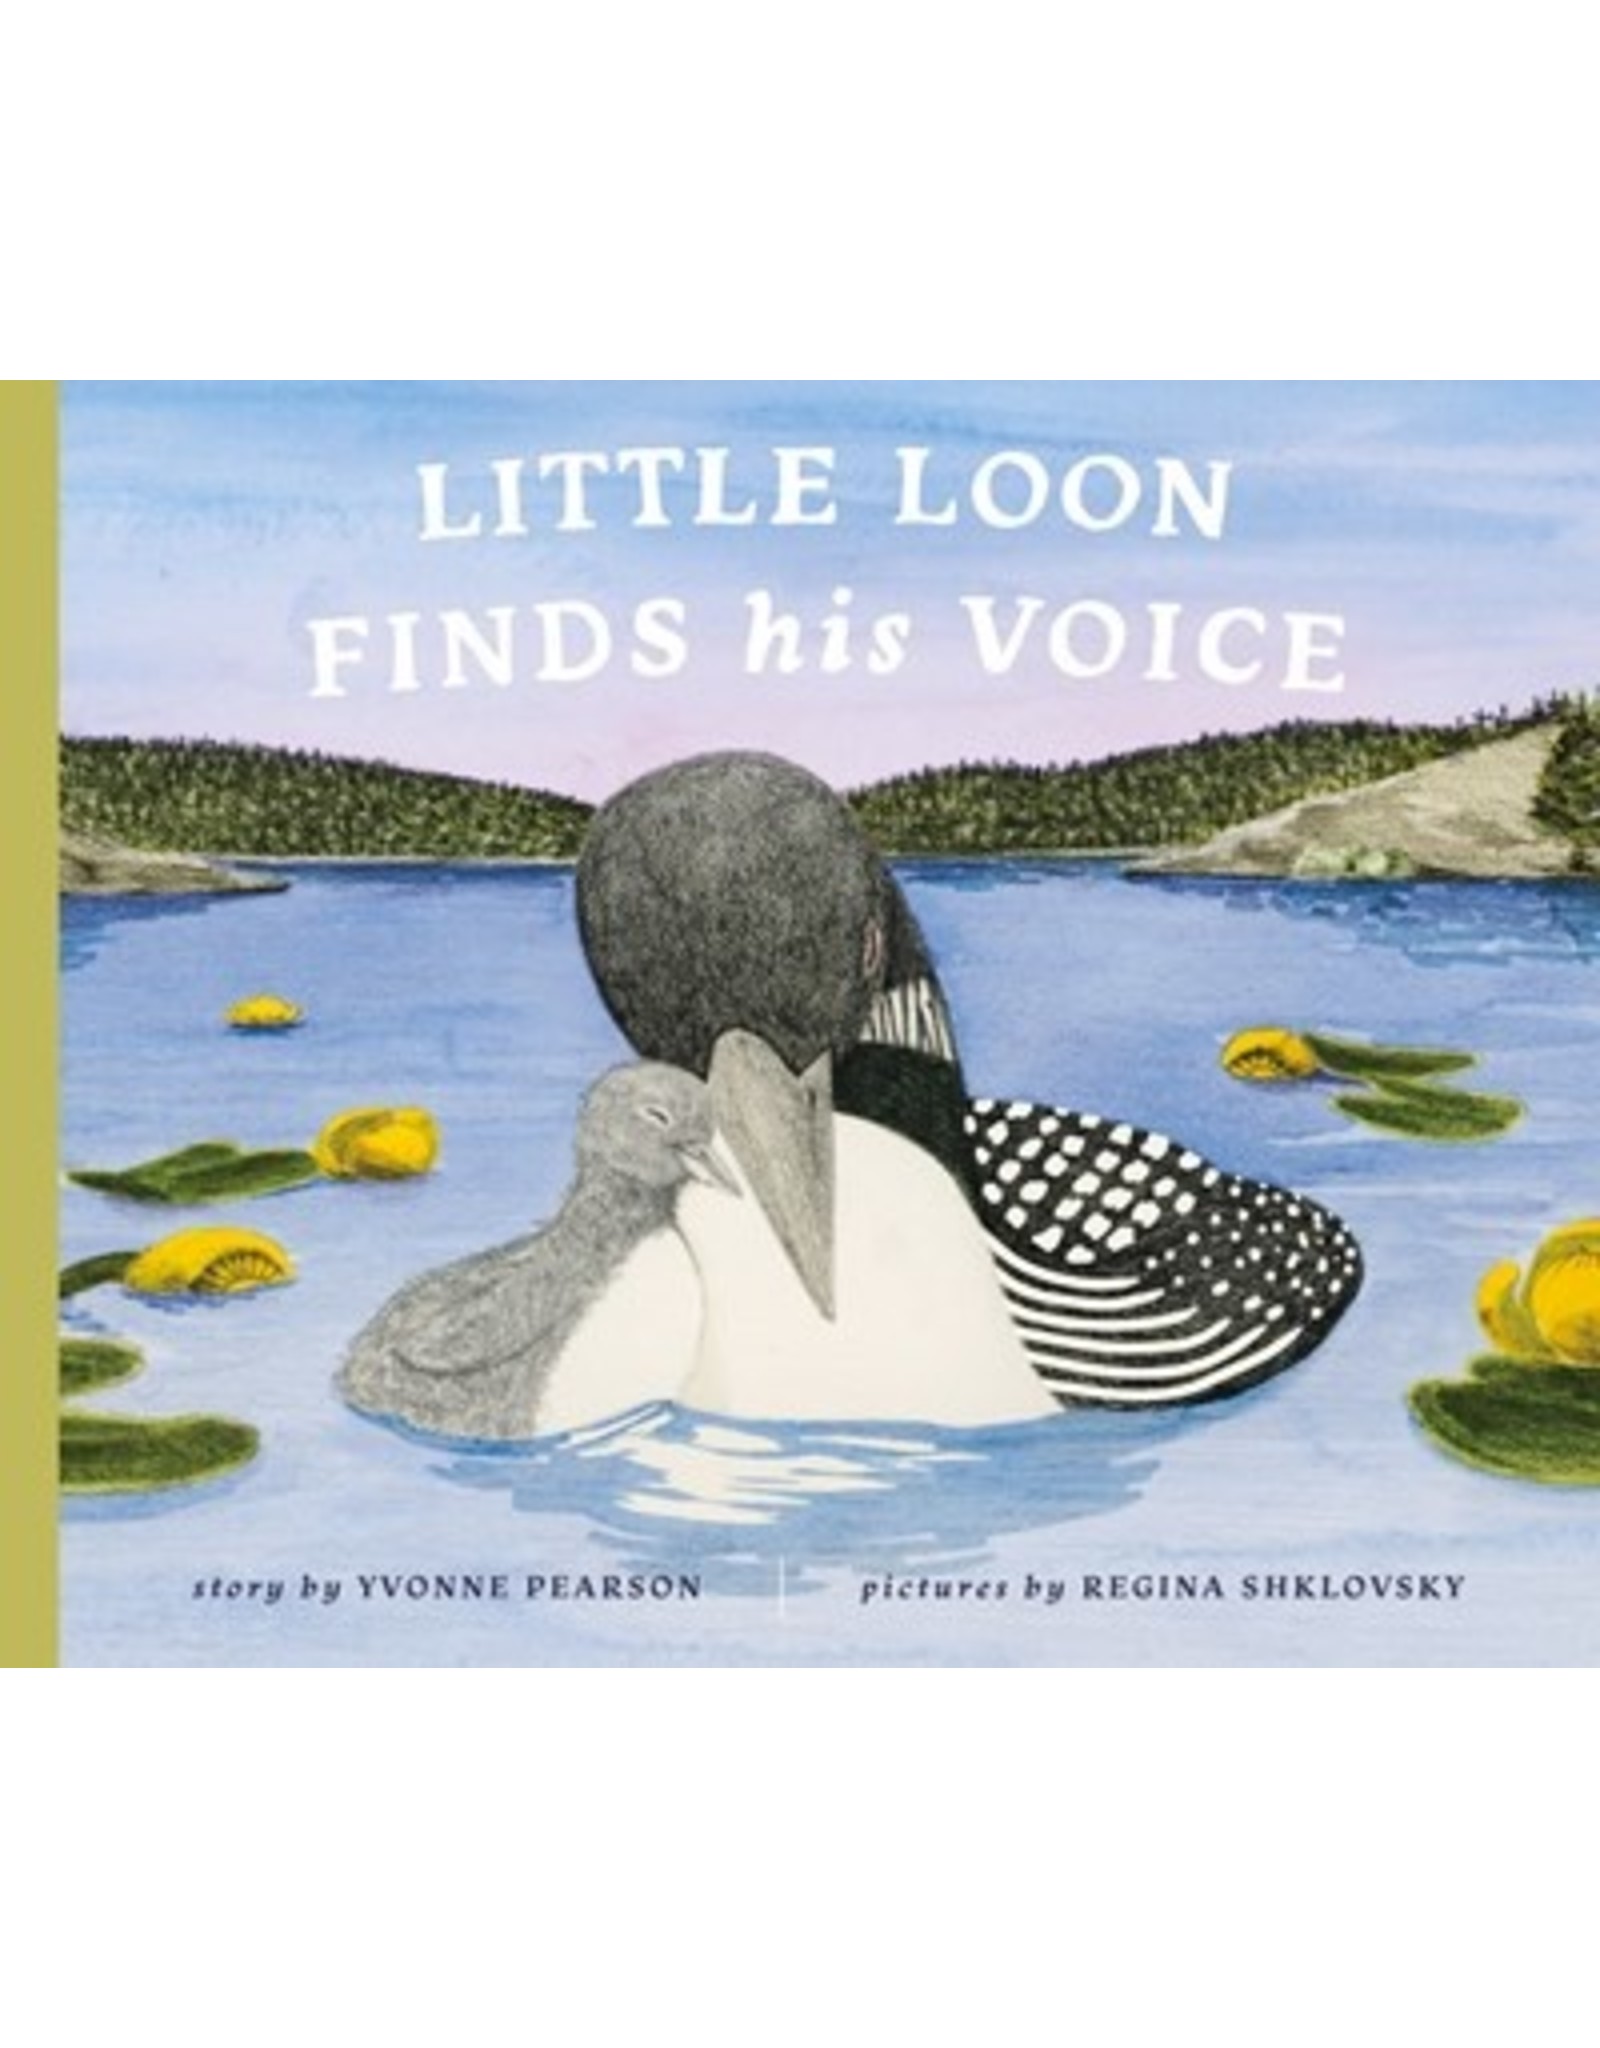 Books Little Loon Finds his Voice by Yvonne Pearson